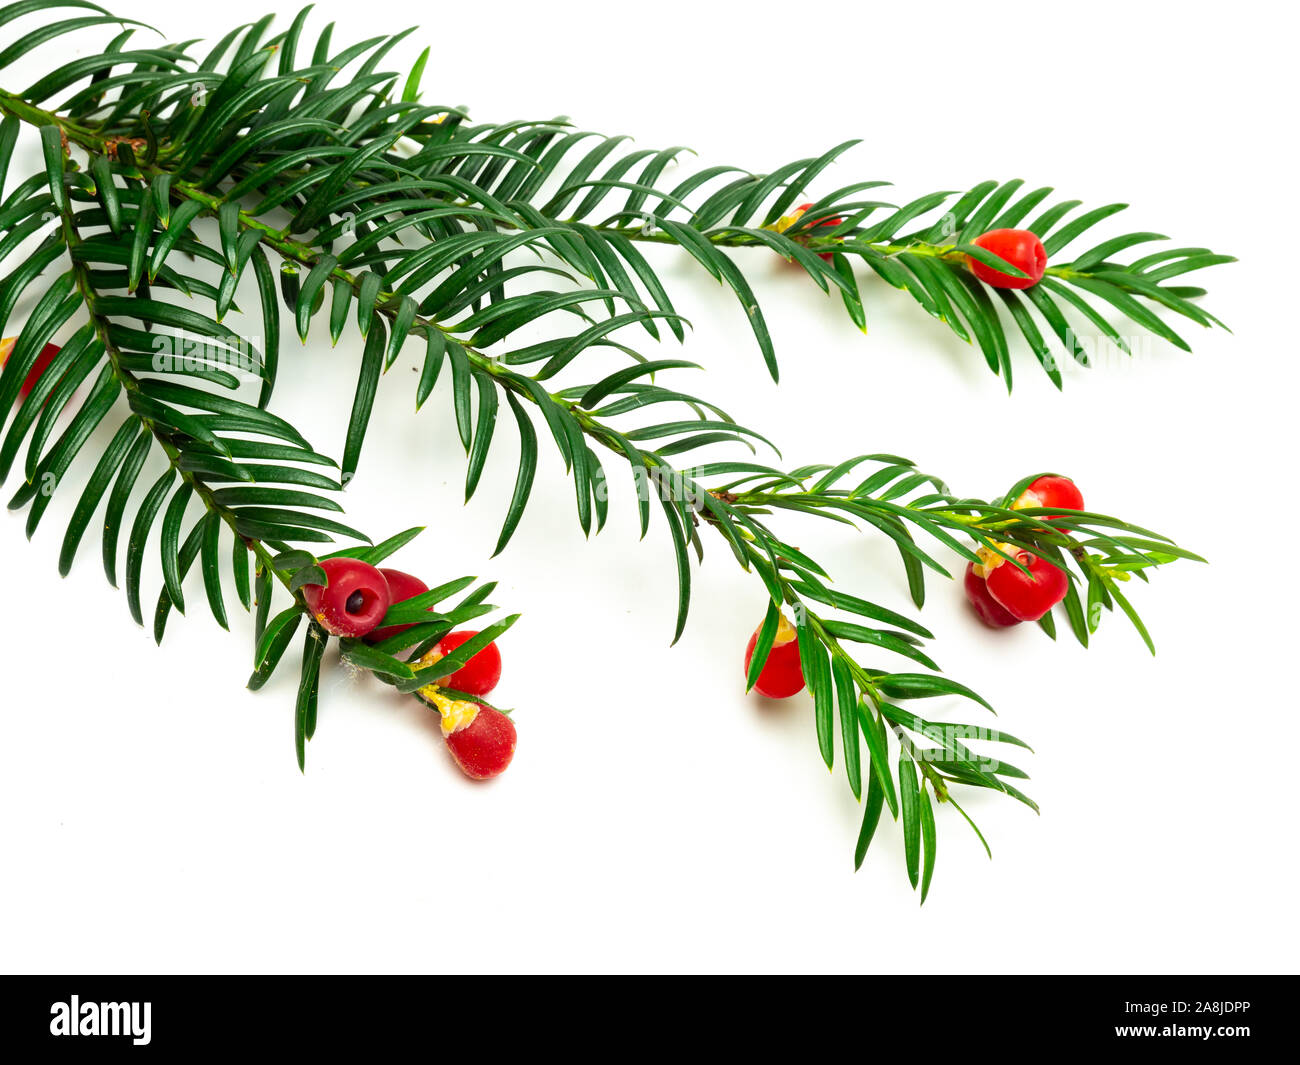 Yew (Taxus baccata) isolated over white background Stock Photo